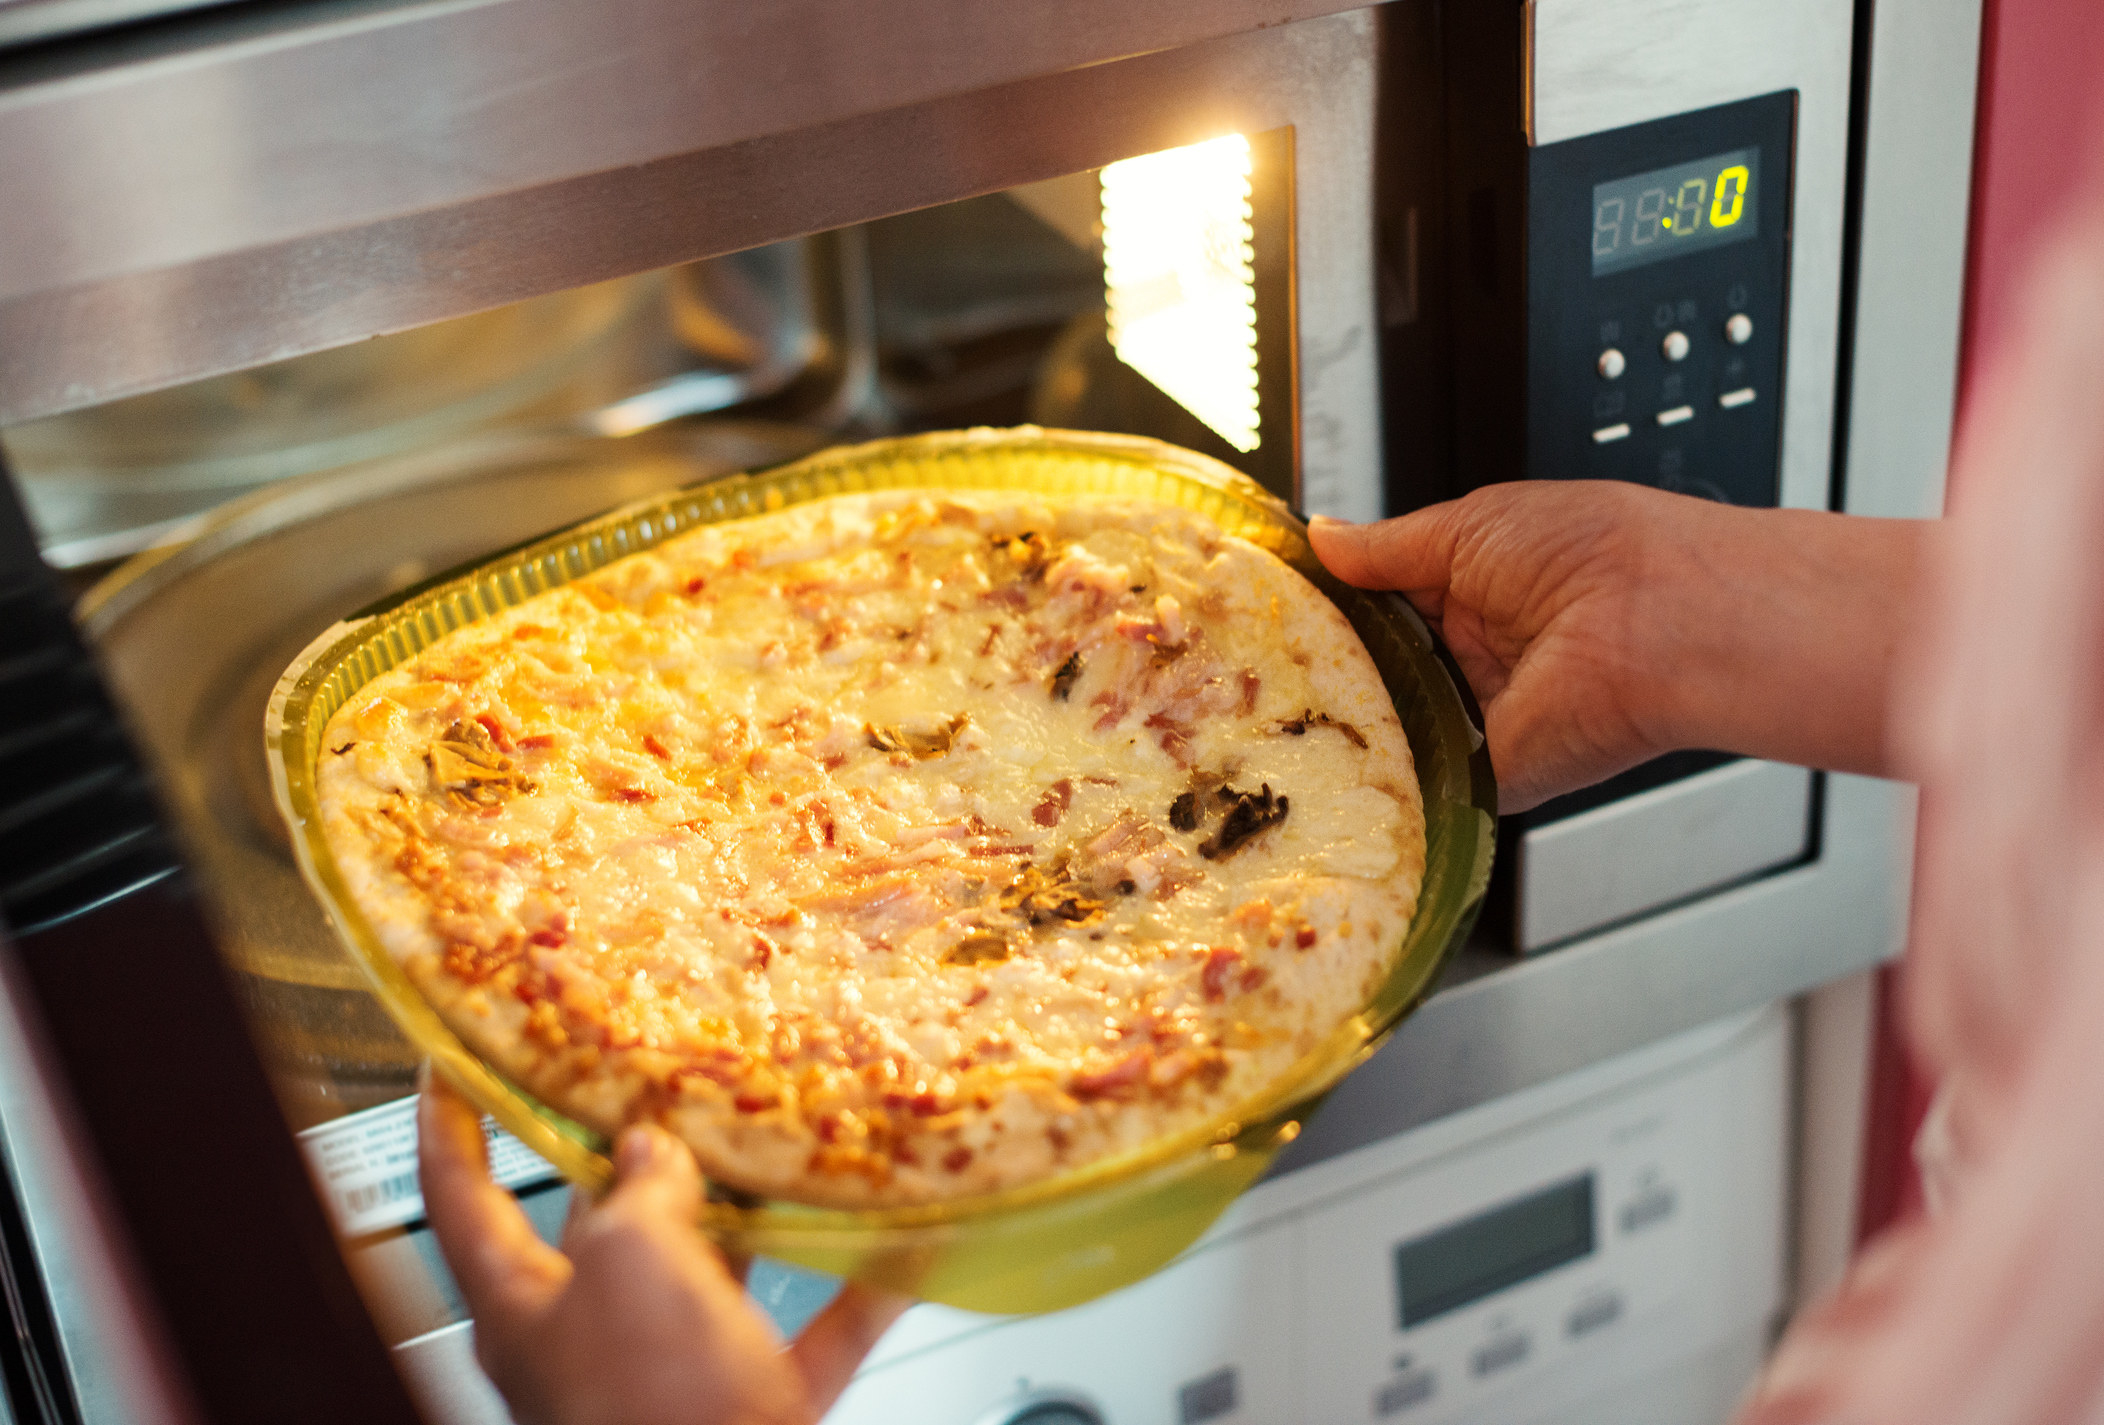 A woman making pizza in the microwave.